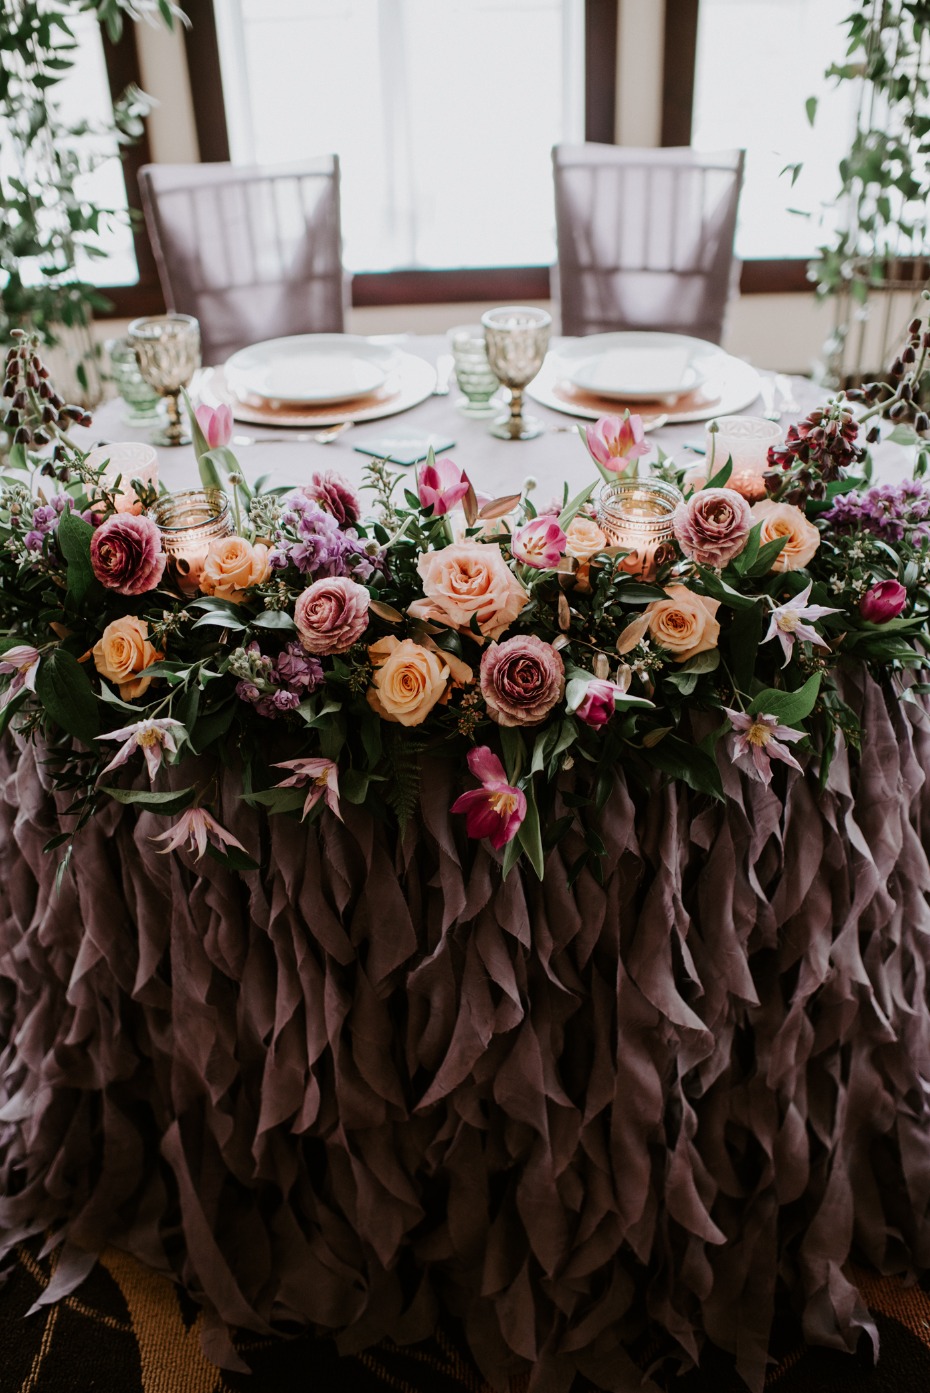 Sweetheart table with florals and ruffles